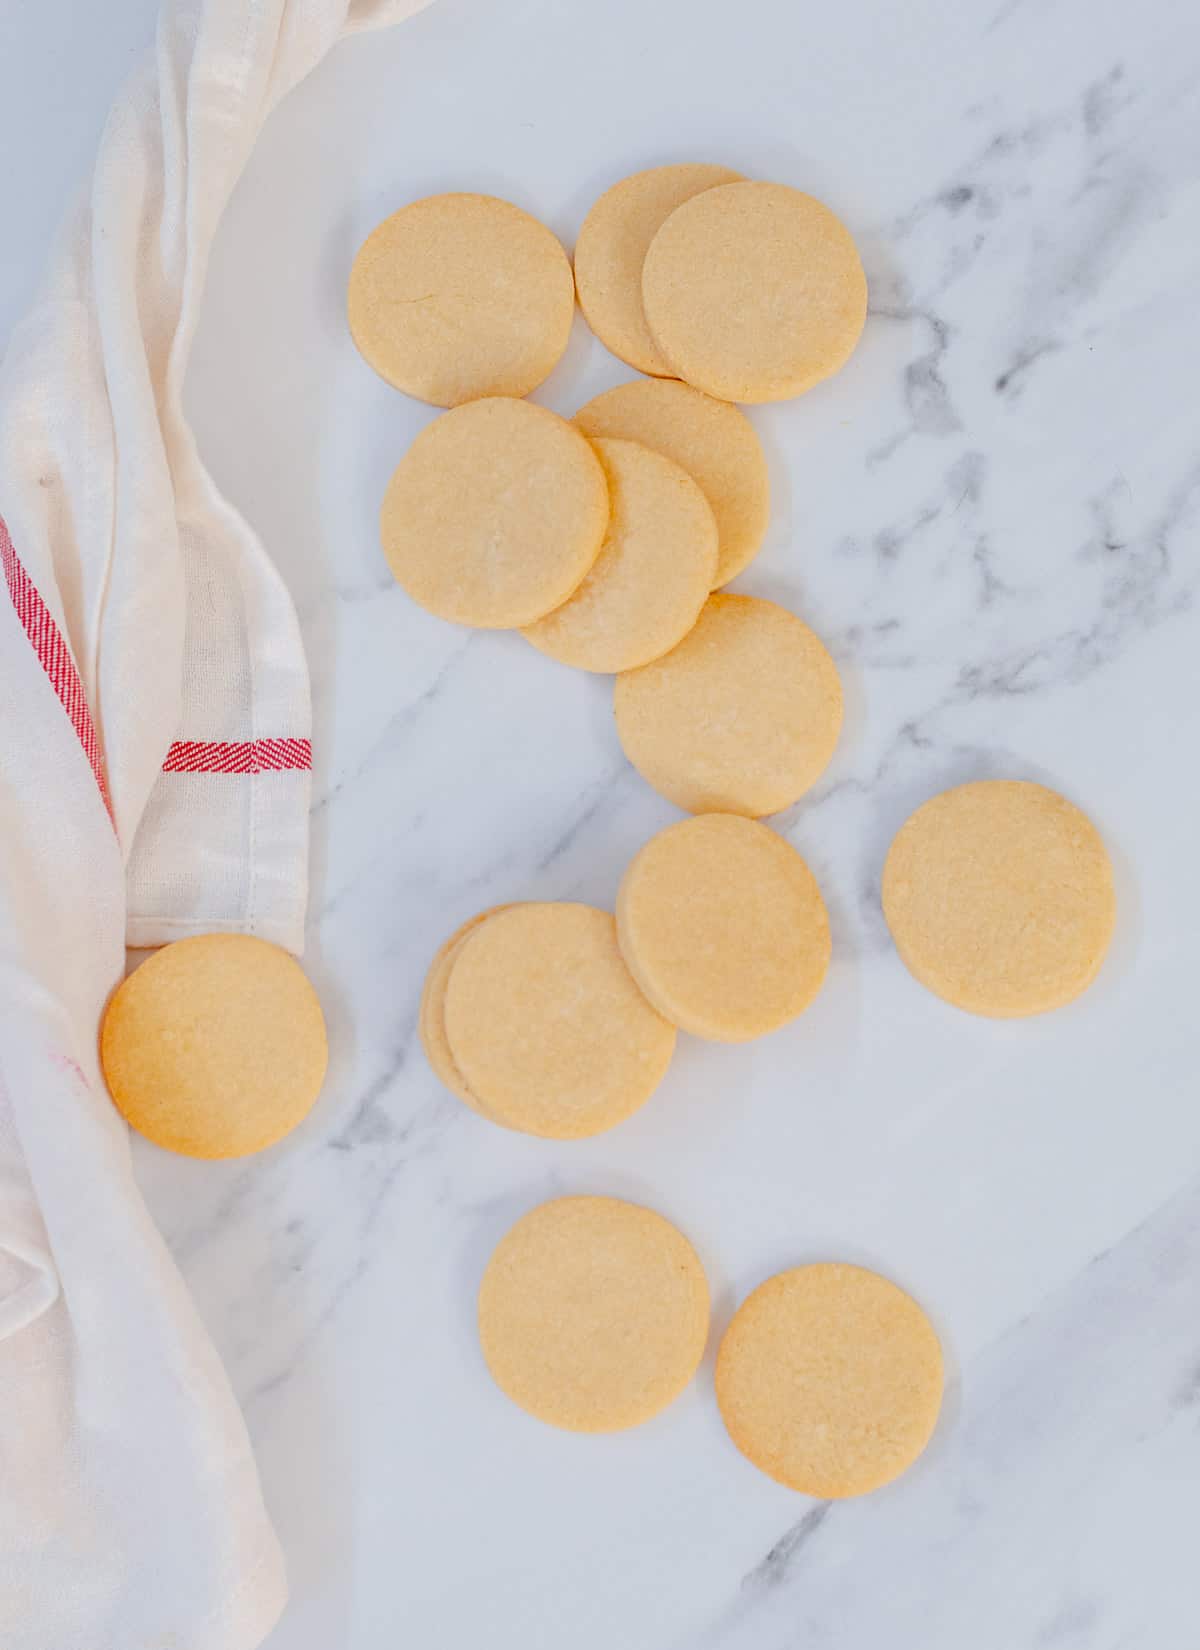 Homemade sugar cookies on a white marble background.